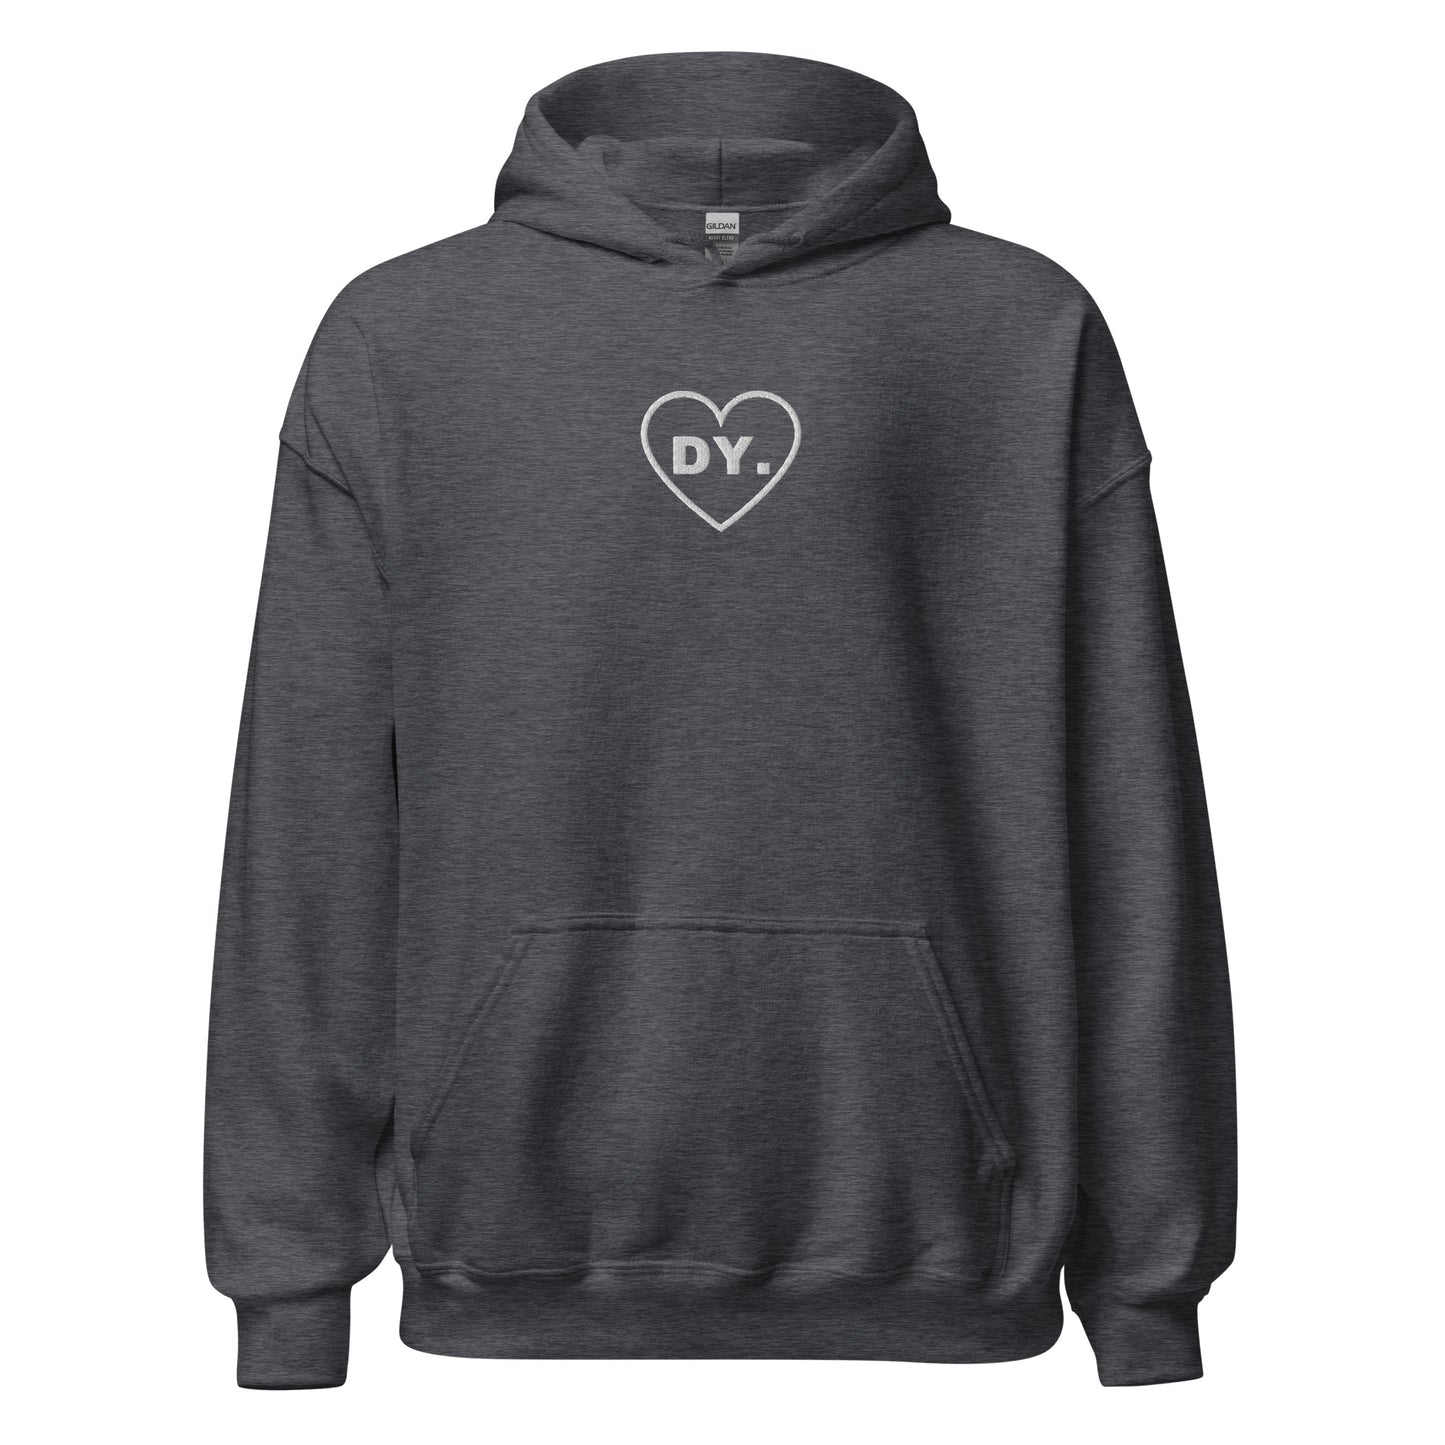 DY Yours Truly Unisex Hoodie